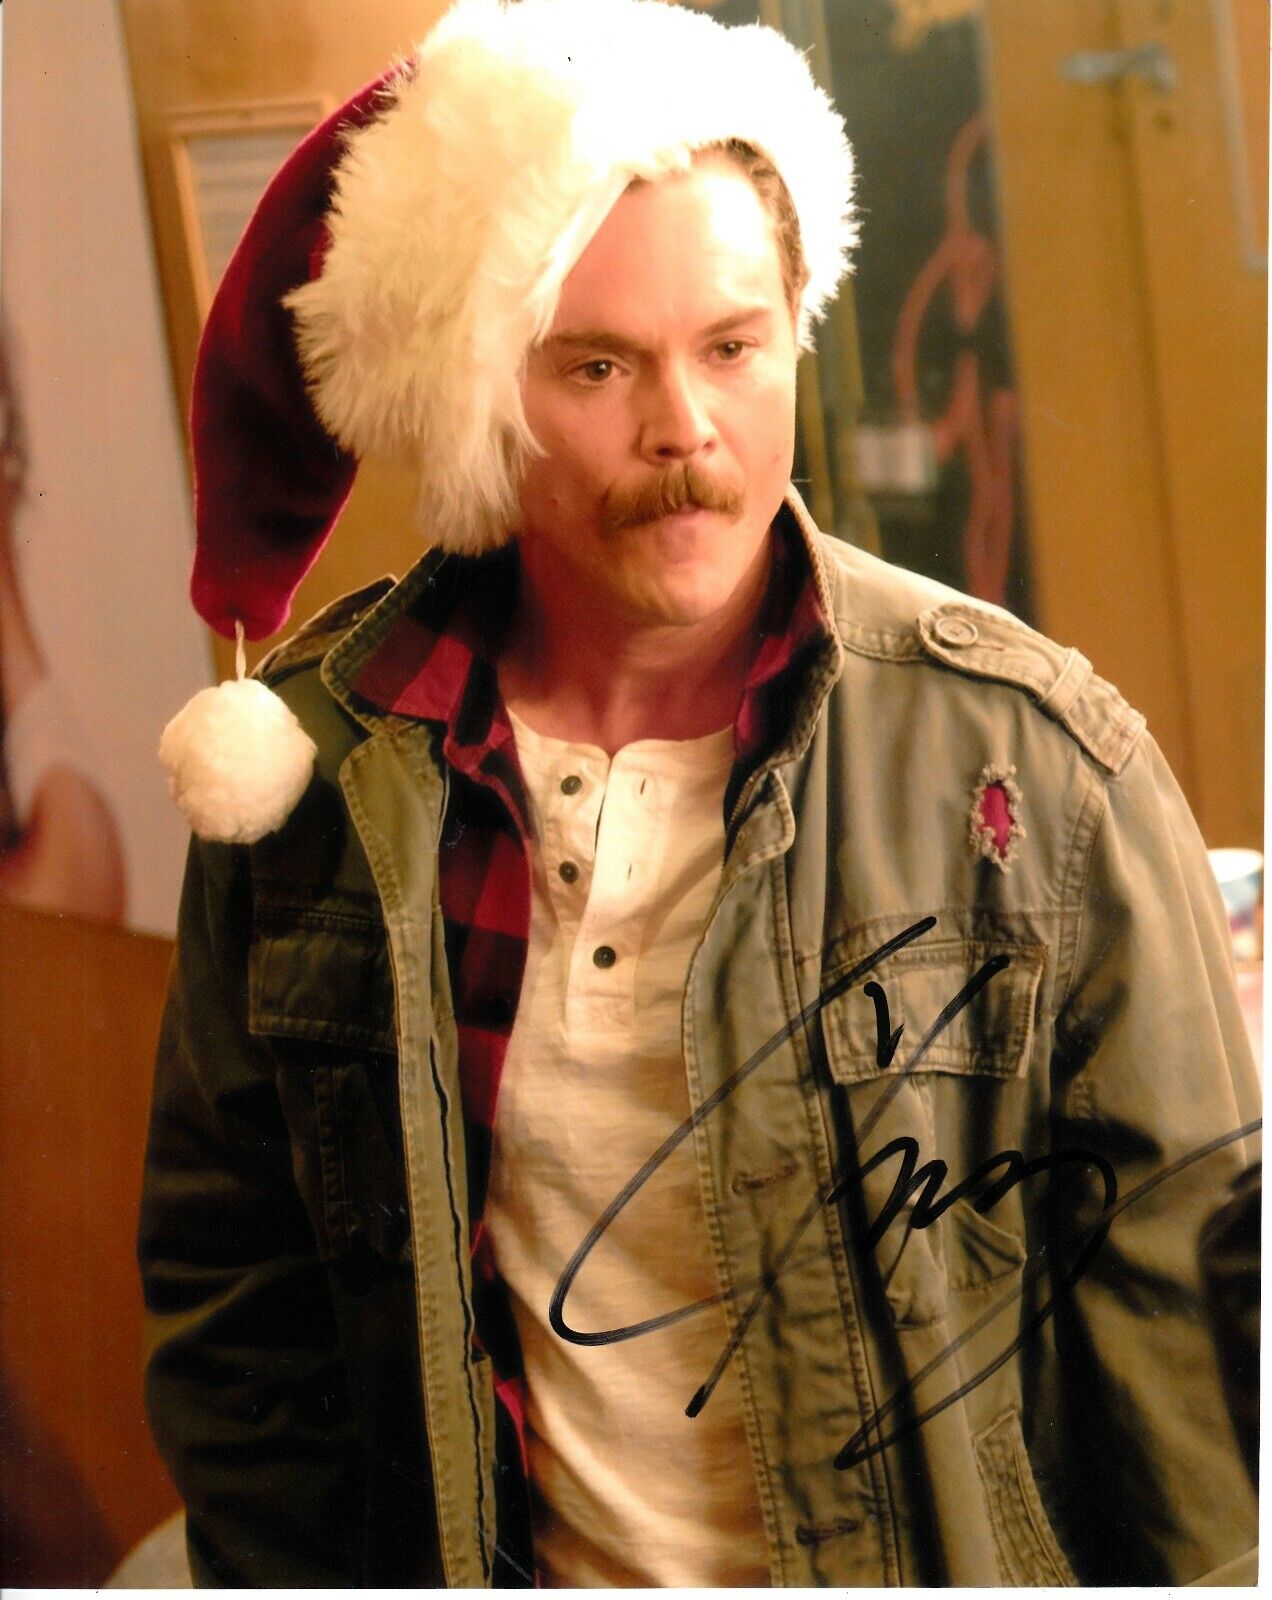 CLAYNE CRAWFORD SIGNED LETHAL WEAPON Photo Poster painting UACC REG 242 (5)